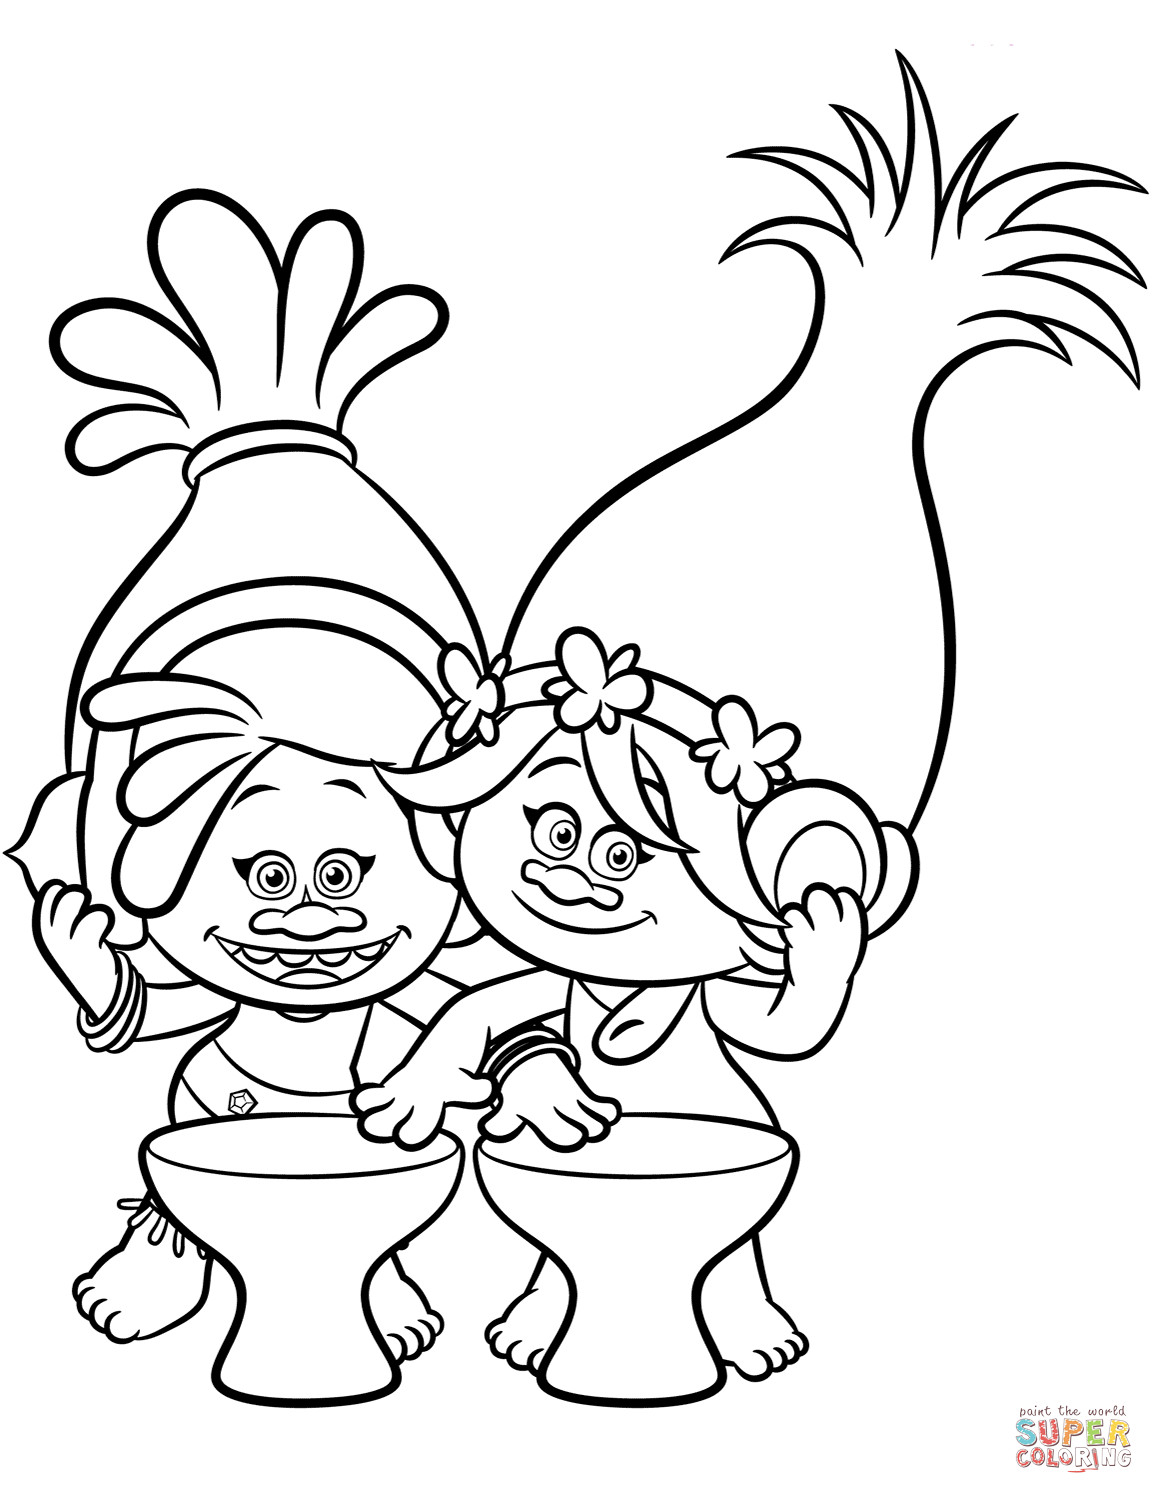 Poppy Trolls Coloring Pages
 Dj Suki & Poppy from Trolls coloring page